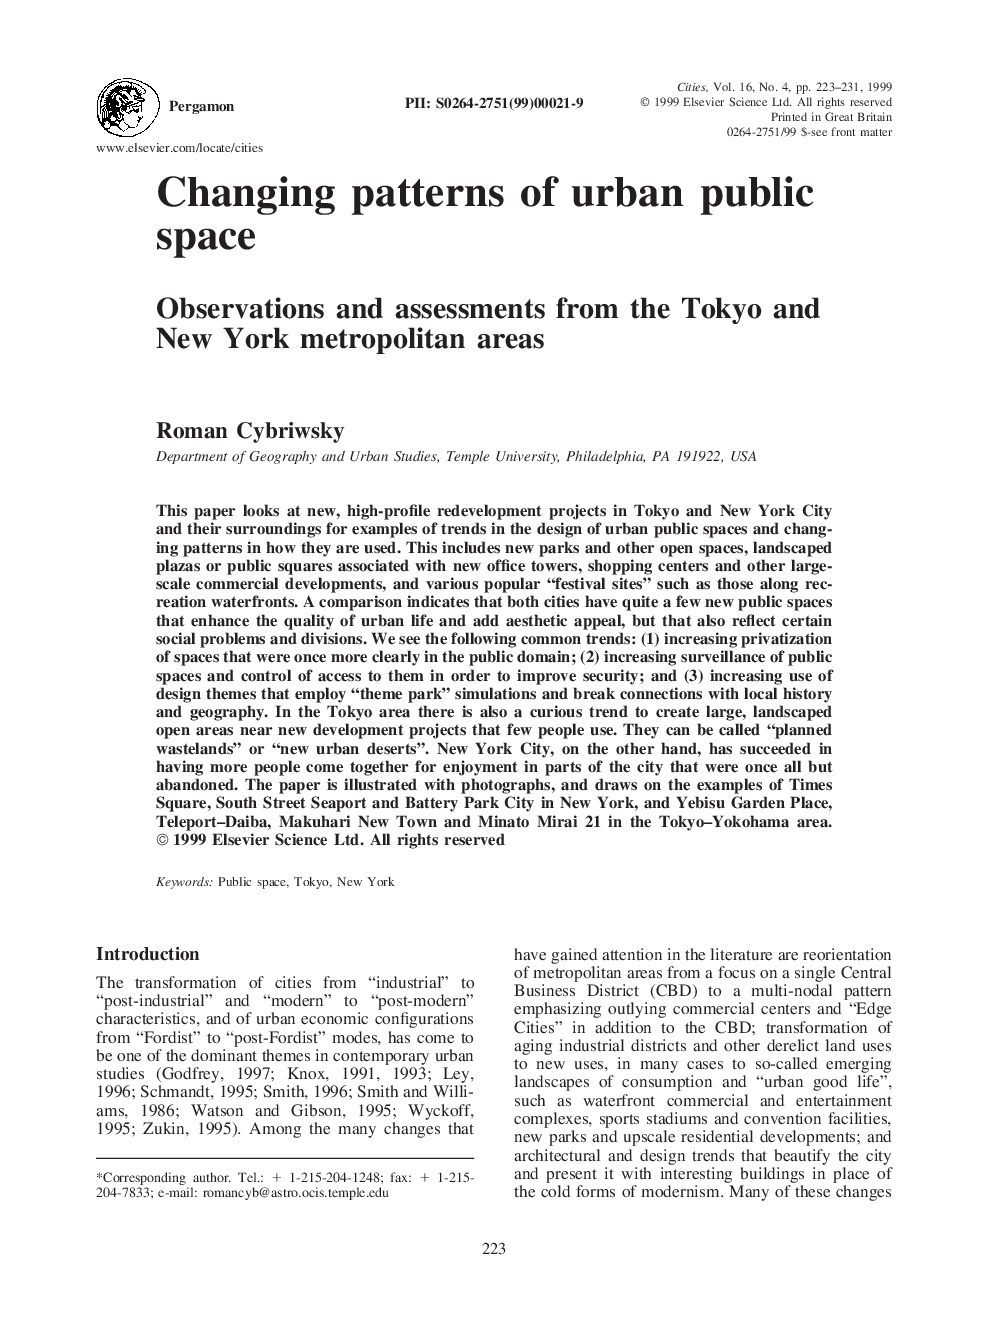 Changing patterns of urban public space: Observations and assessments from the Tokyo and New York metropolitan areas